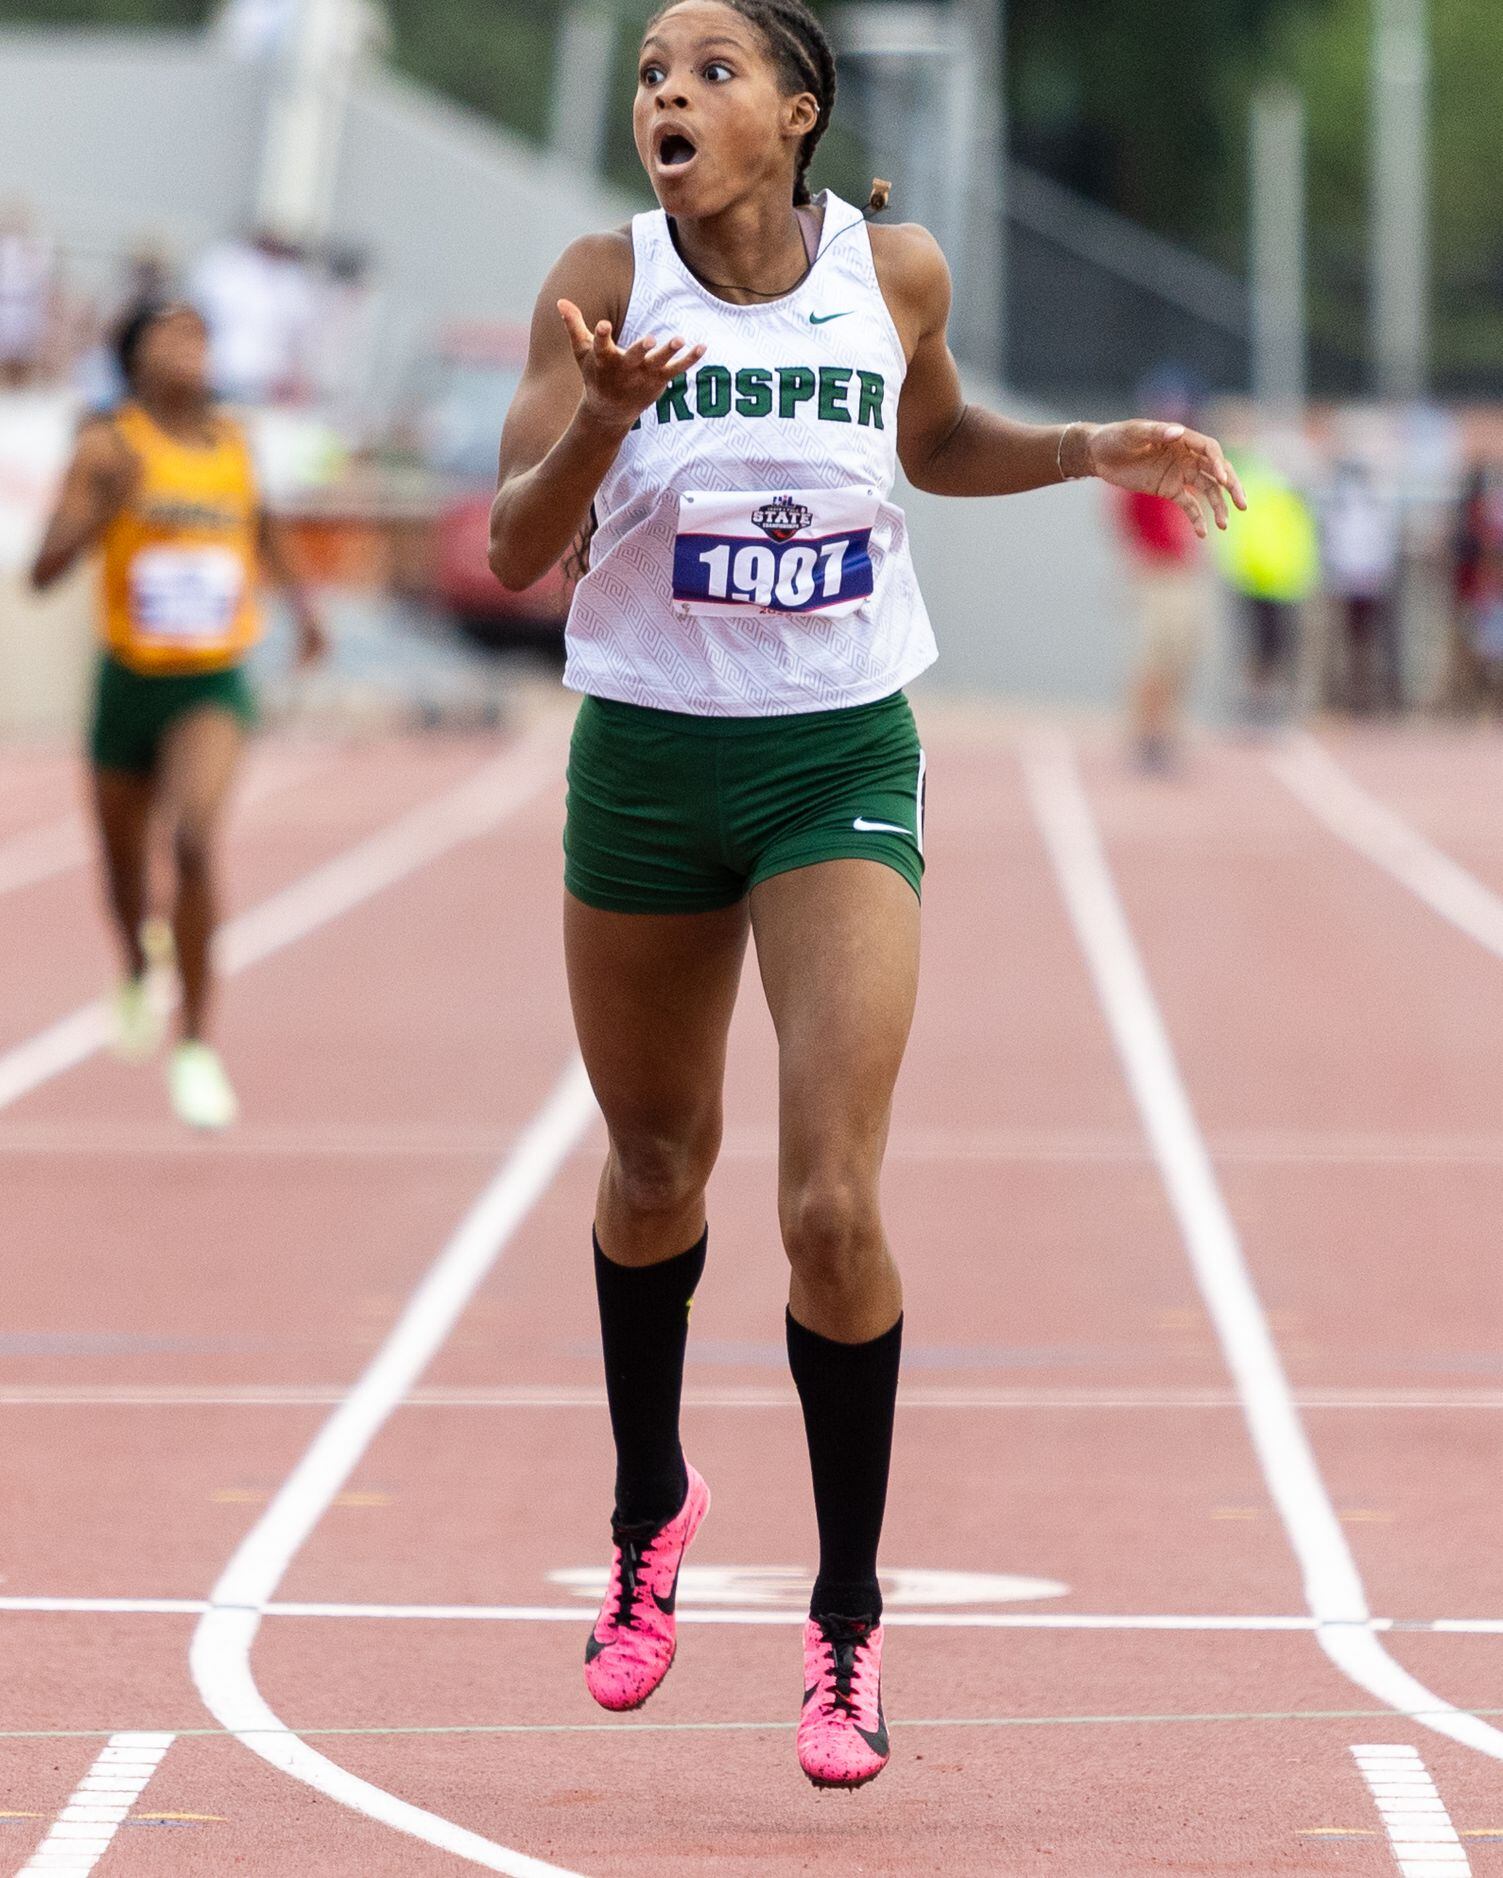 Smashing records! See Dallasarea track stars compete at the 2022 UIL